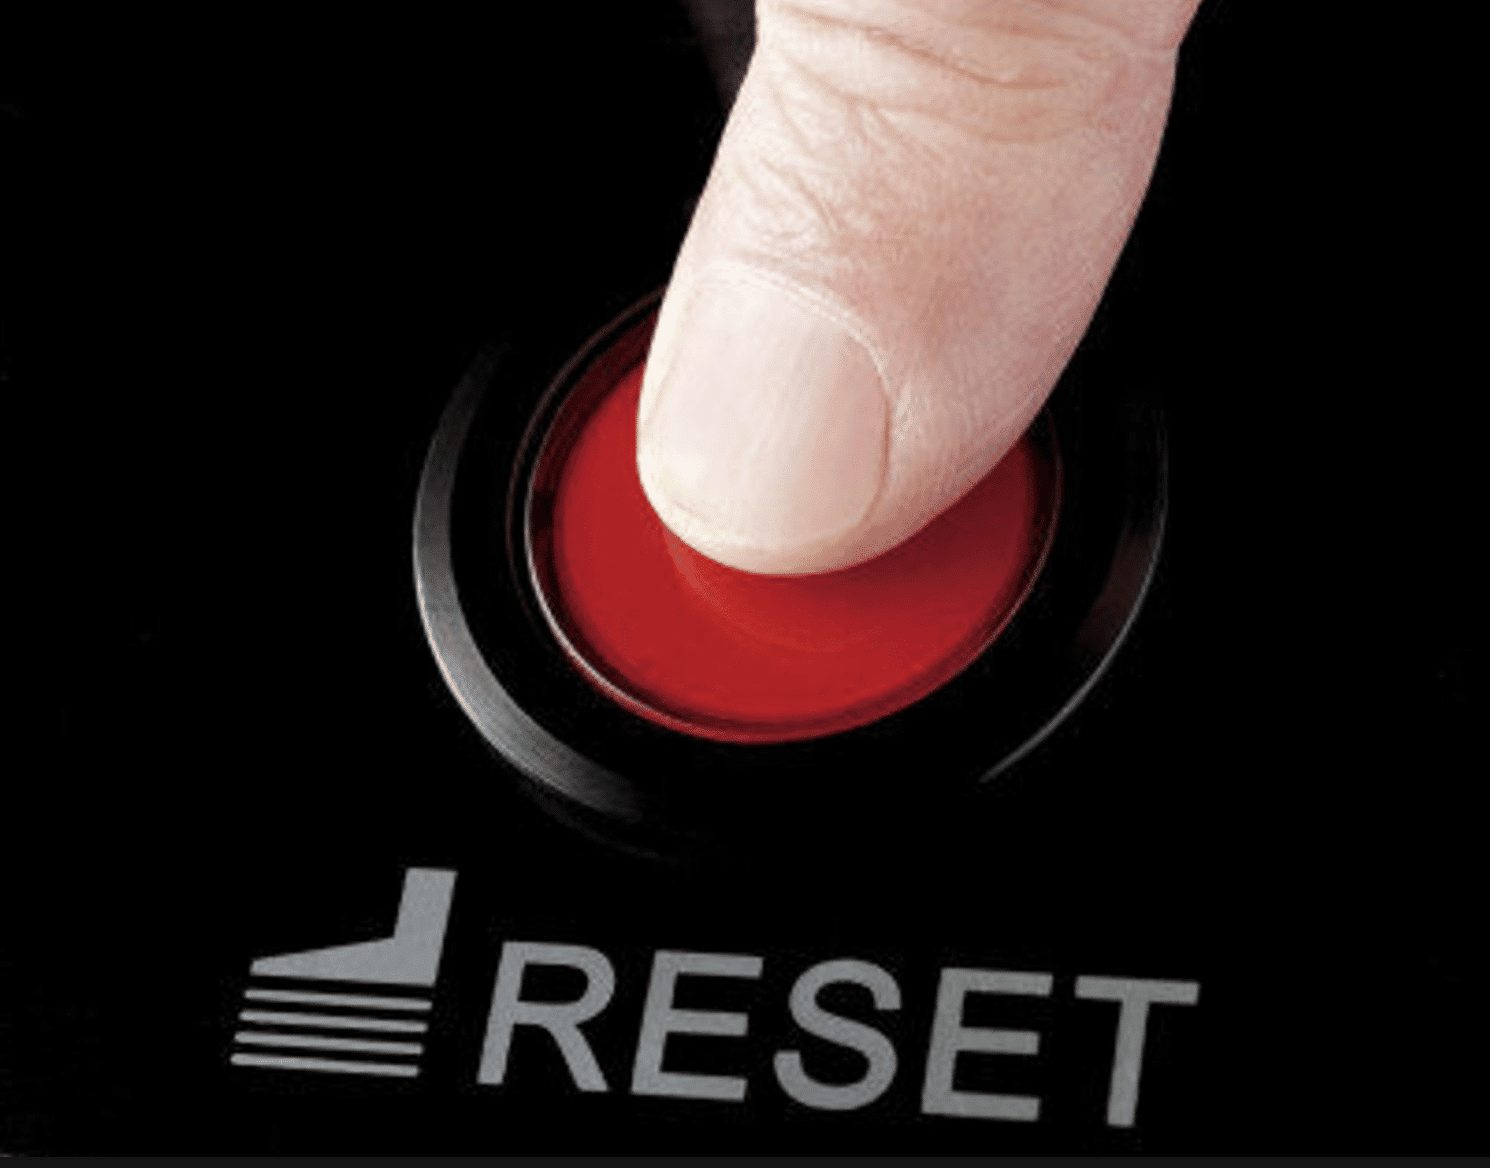 Delete Reset is an hypnotic process to stop addictive, OCD and repetitive behaviors